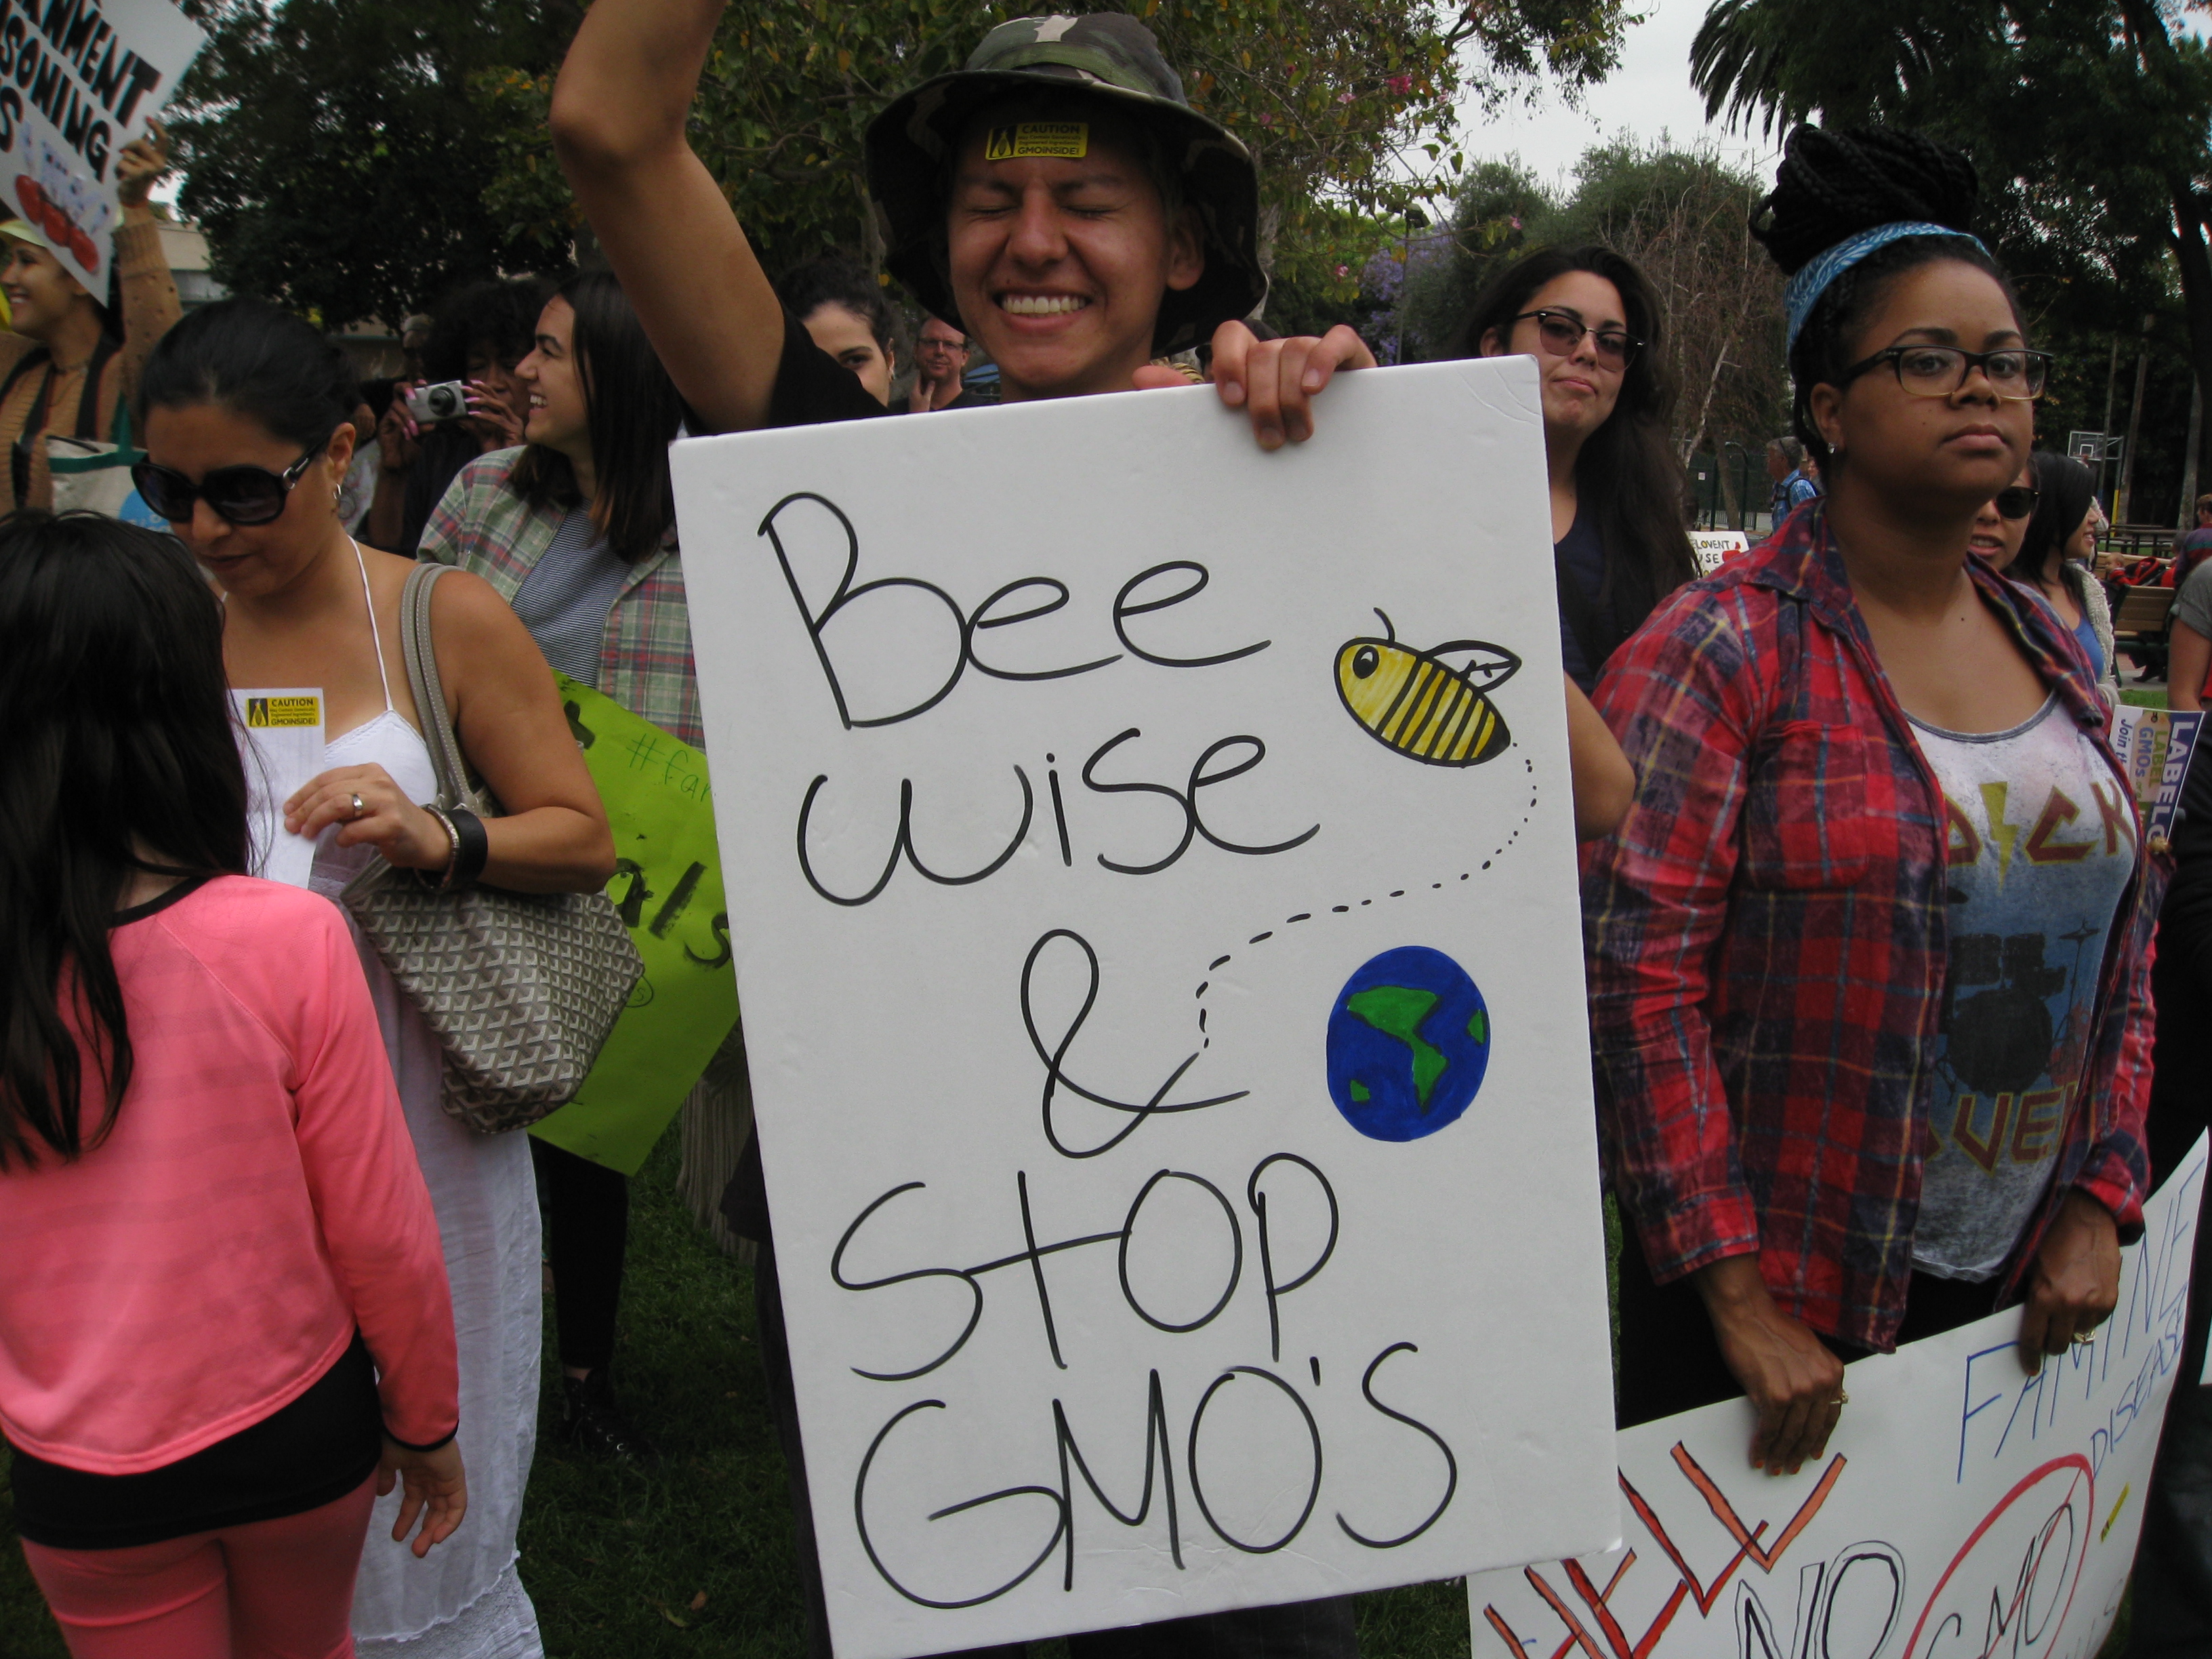 Monsanto makes GMO corn that is damaging bees and other beneficial insects.